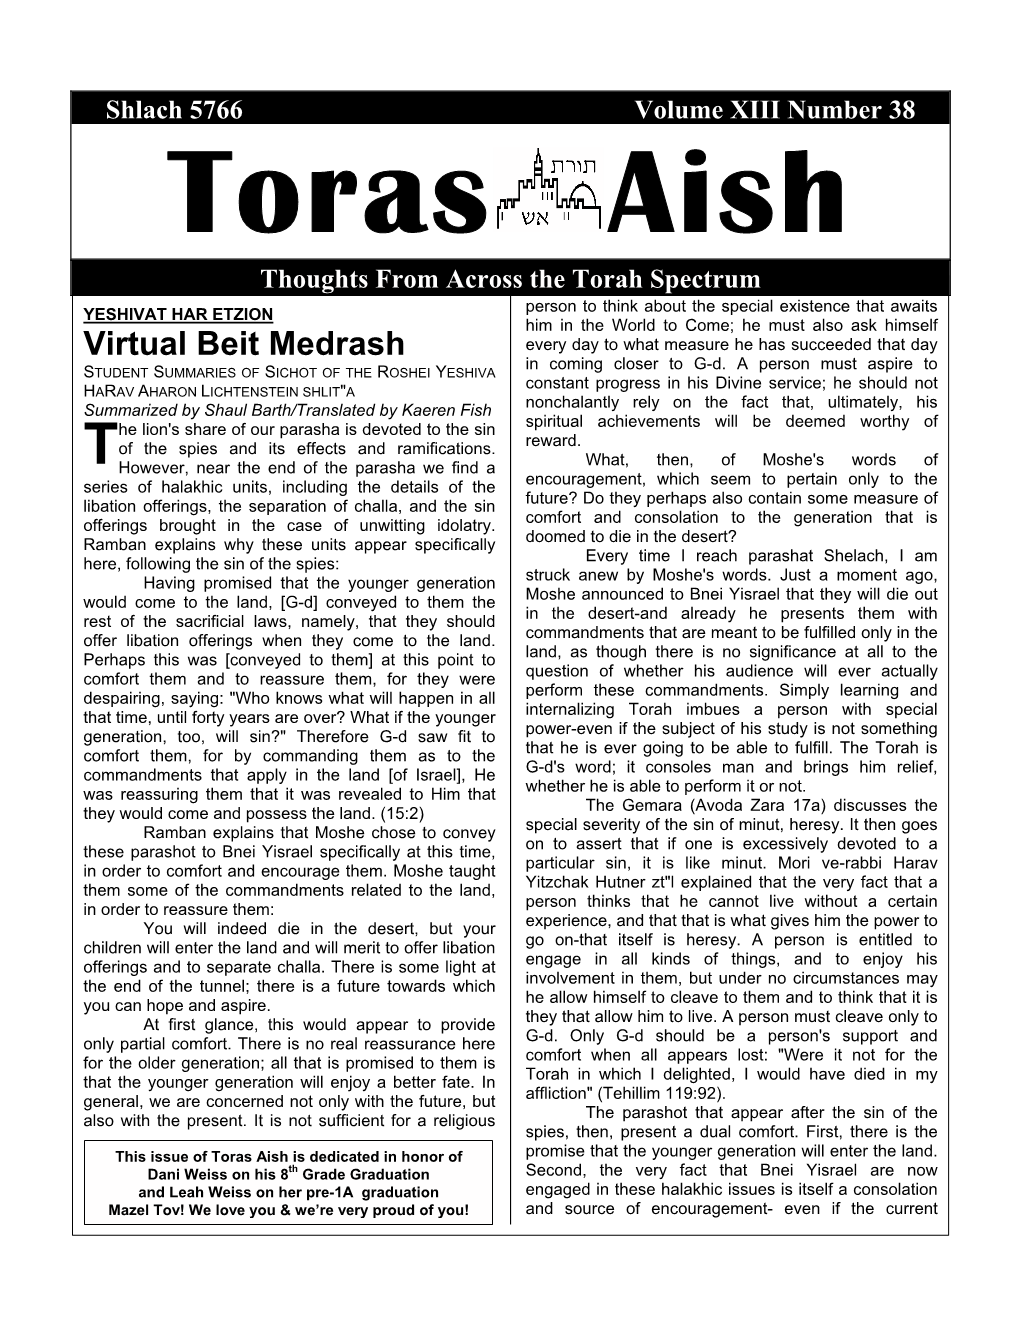 Virtual Beit Medrash Every Day to What Measure He Has Succeeded That Day in Coming Closer to G-D